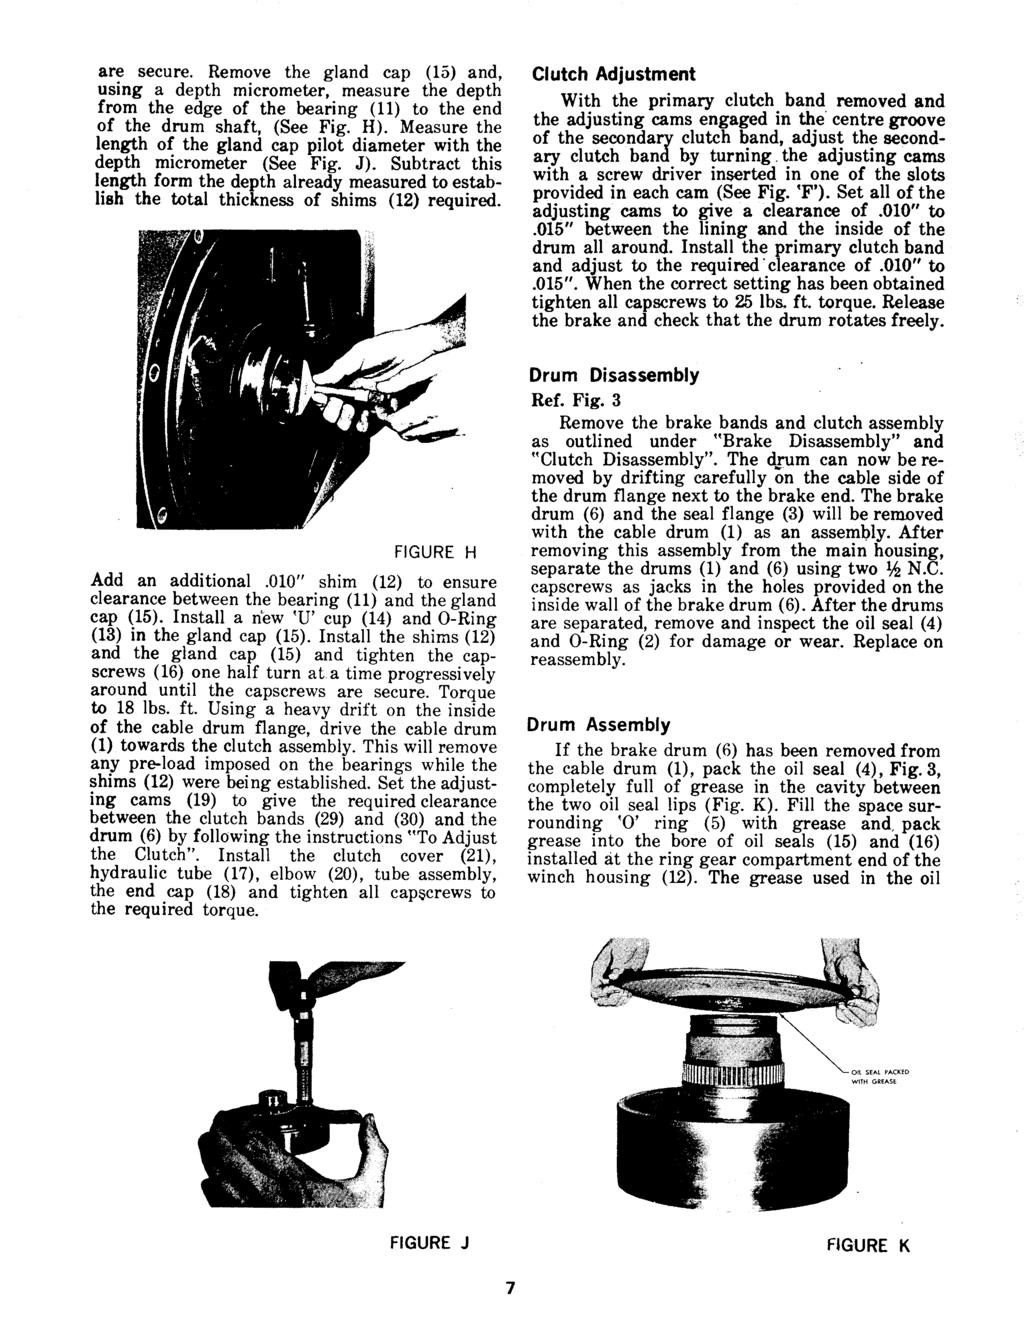 are secure. Remove the gland cap (15) and, using a depth micrometer, measure the depth from the edge of the bearing (11) to the end of the drum shaft, (See Fig. H).